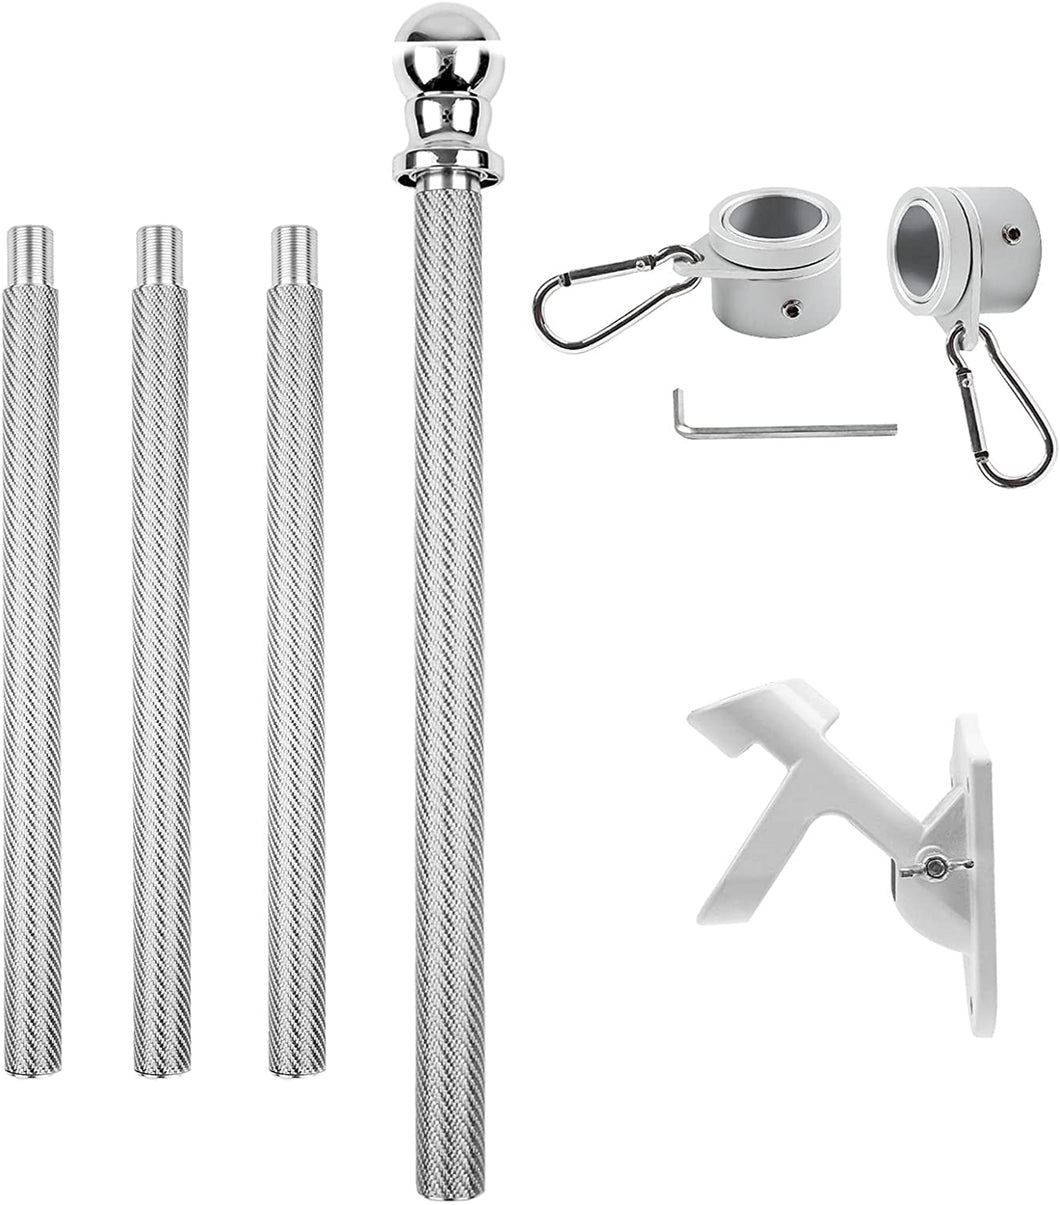 HIBLE 5FT flagpole kit, Suitable for 2x3, 3x5 Flag Heavy Garden flagpole, Home or Commercial